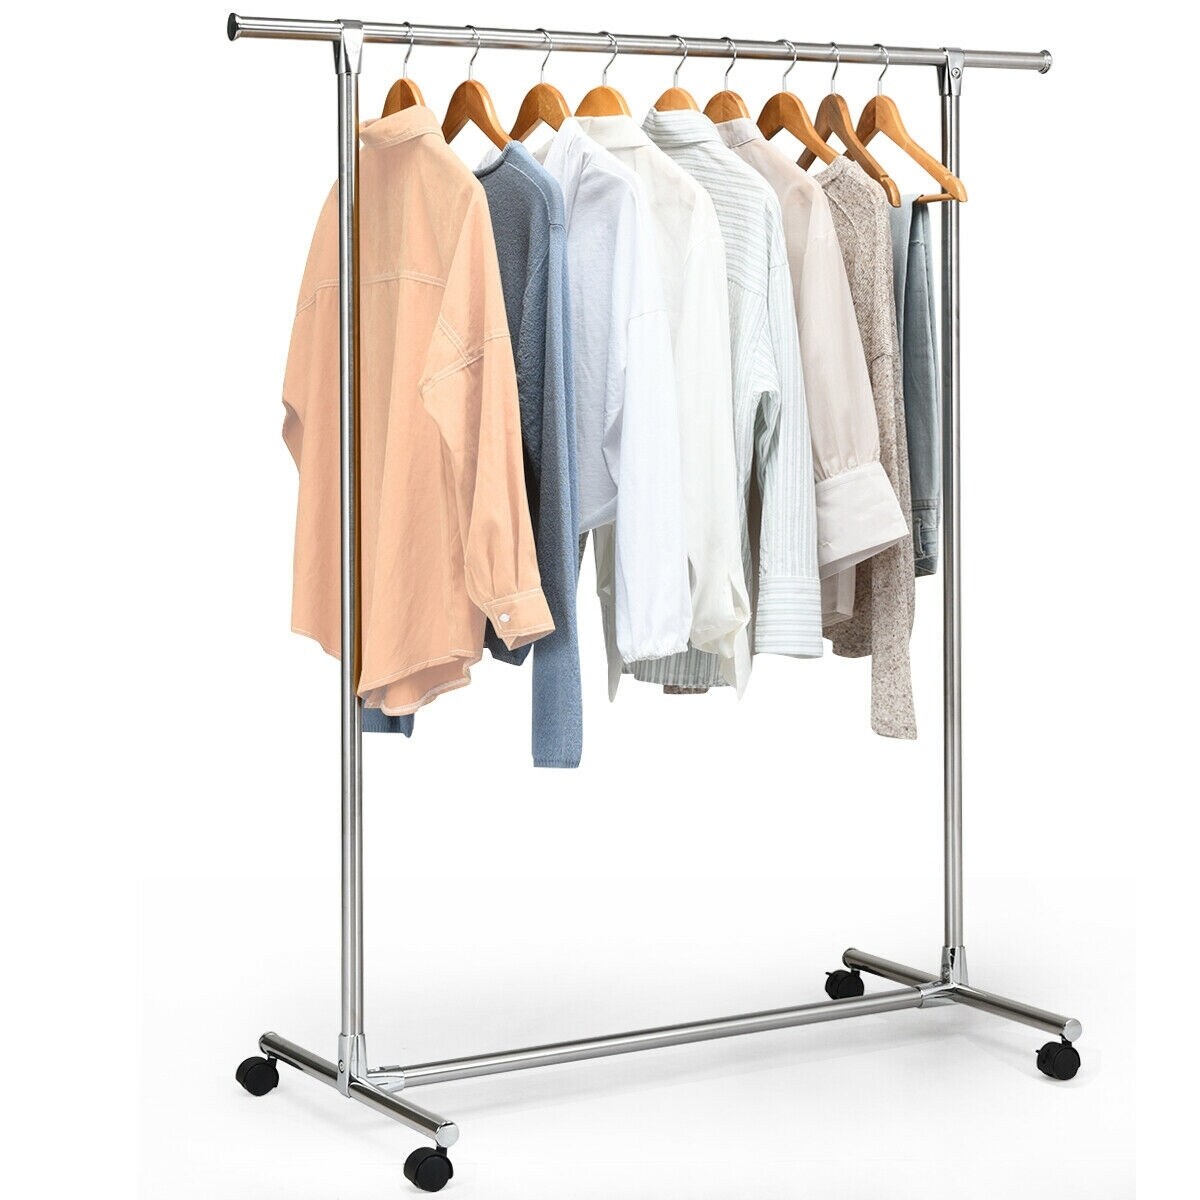 https://ak1.ostkcdn.com/images/products/is/images/direct/db0129bbb2931b338bba09be69a53f6fbec31bfd/Clothing-Rack-Stainless-Steel-Heavy-Duty-Hanging-Rail-with-Wheels.jpg